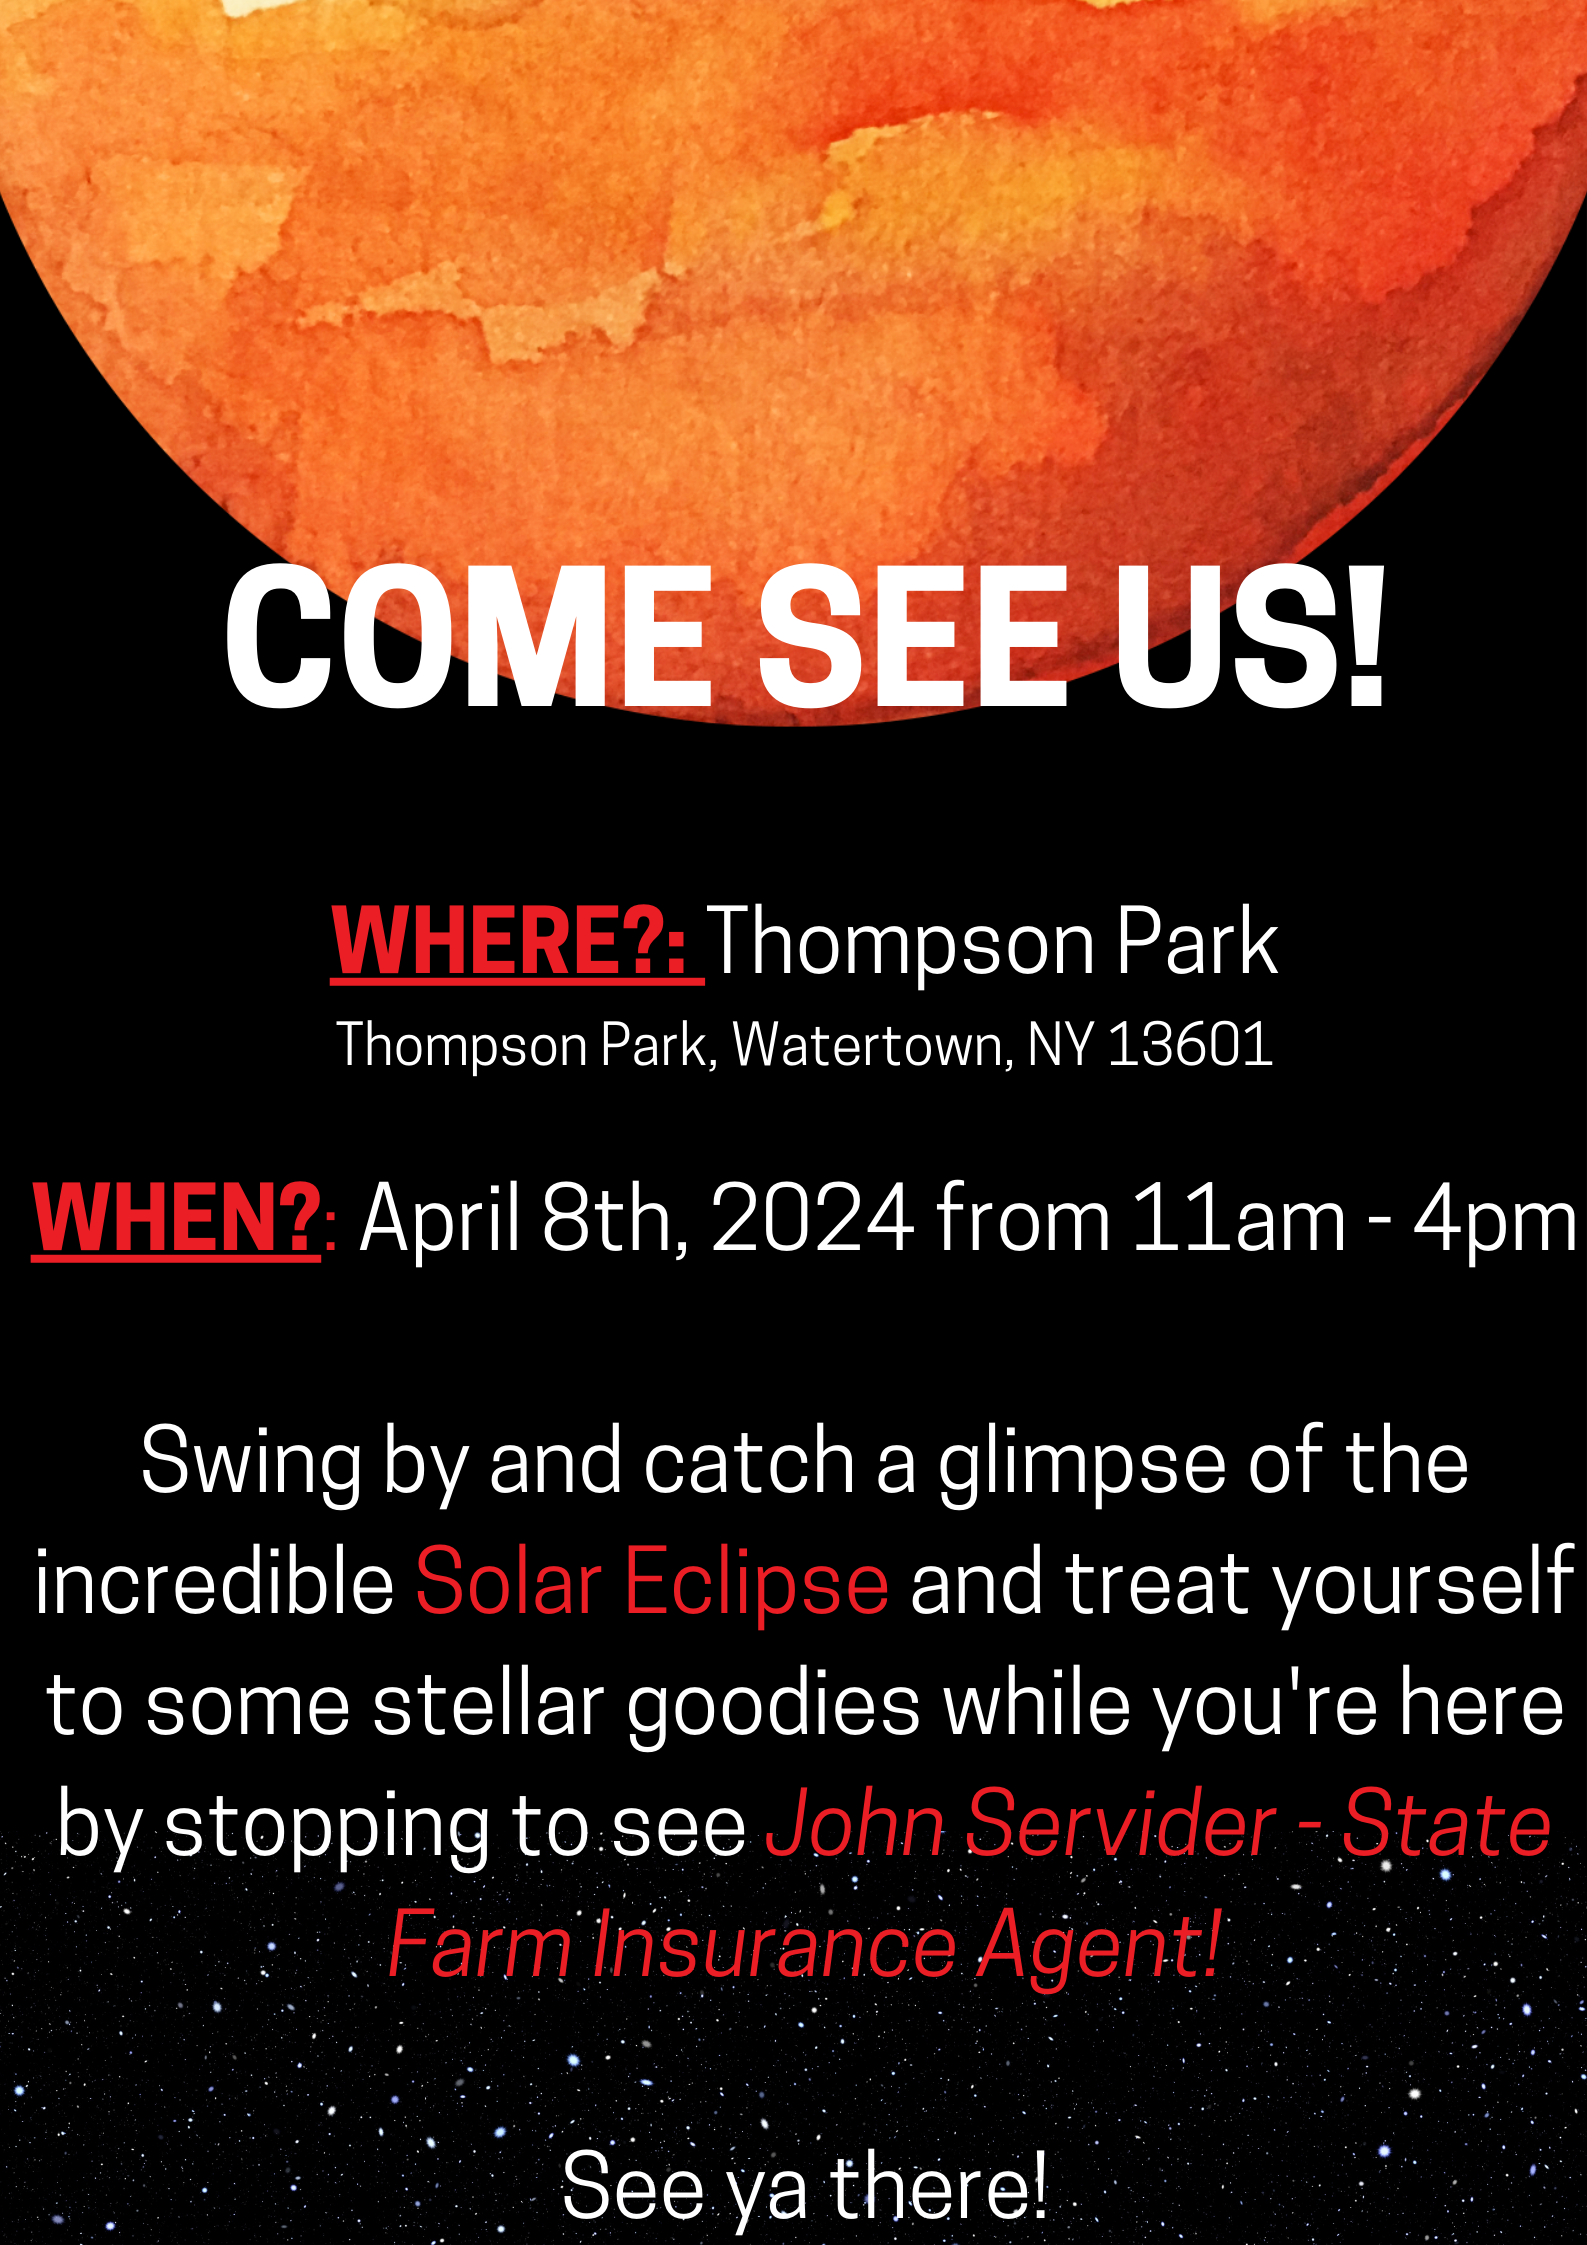 Stop by and see us at Thompson Park for the Solar Eclipse!!